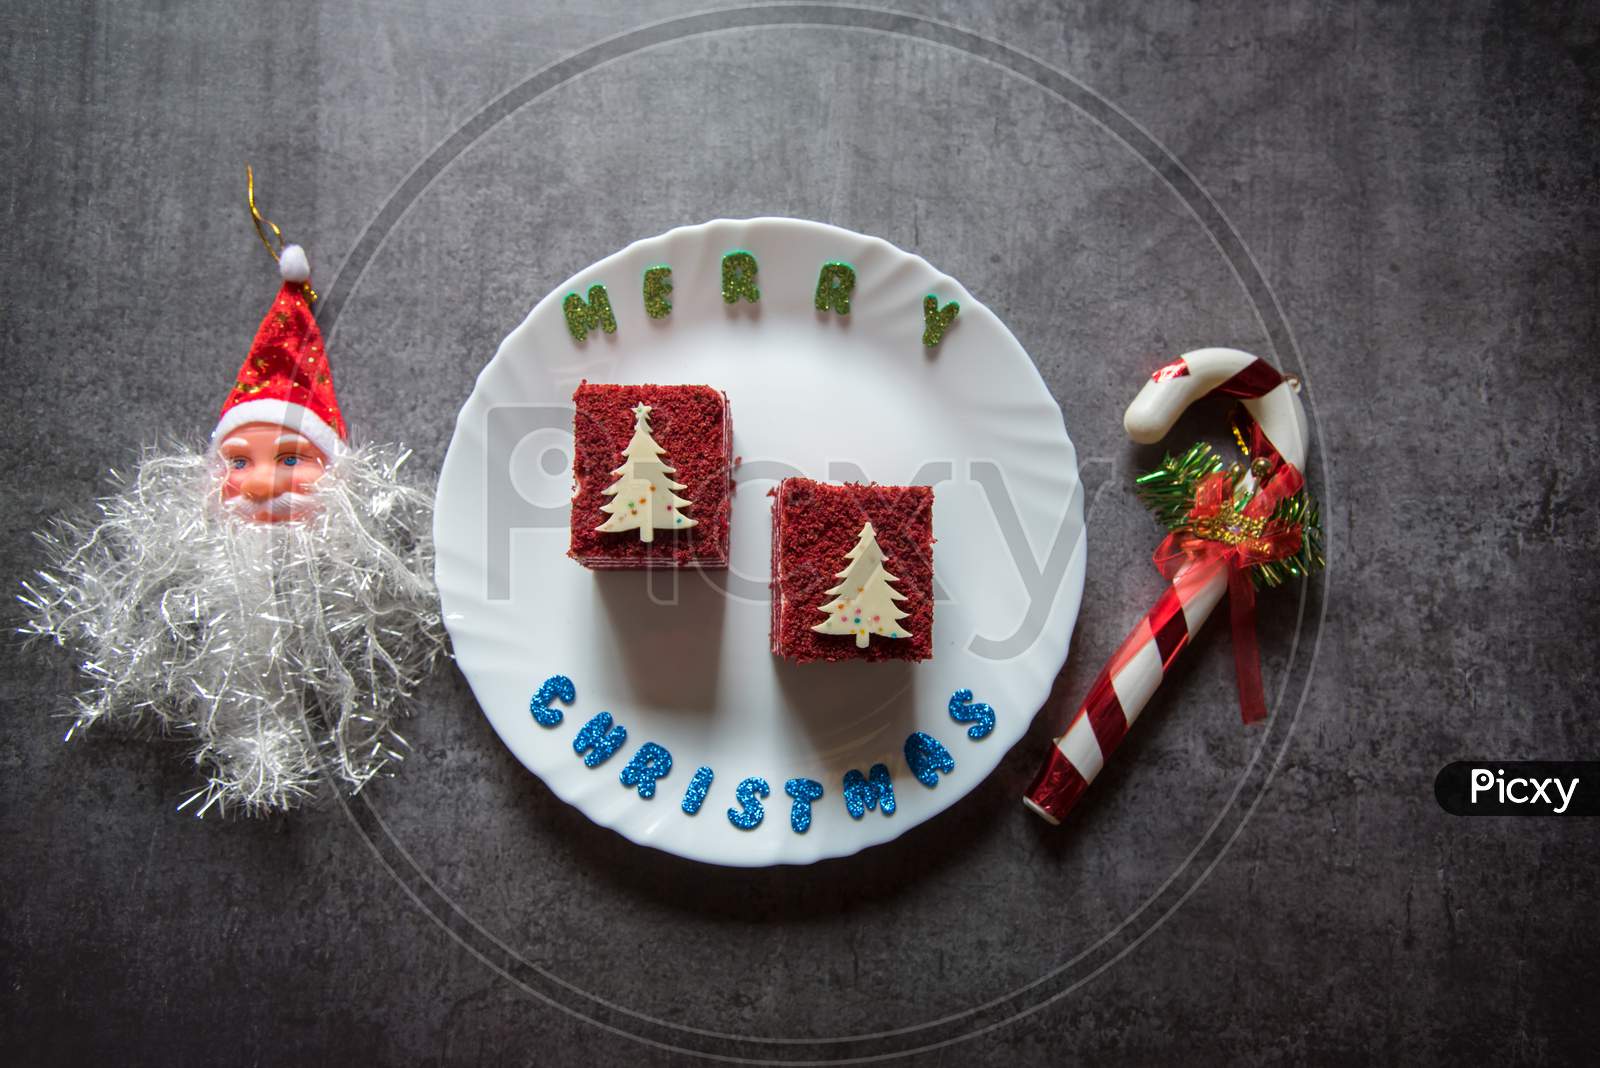 Red velvet cake on a plate along with christmas decoration